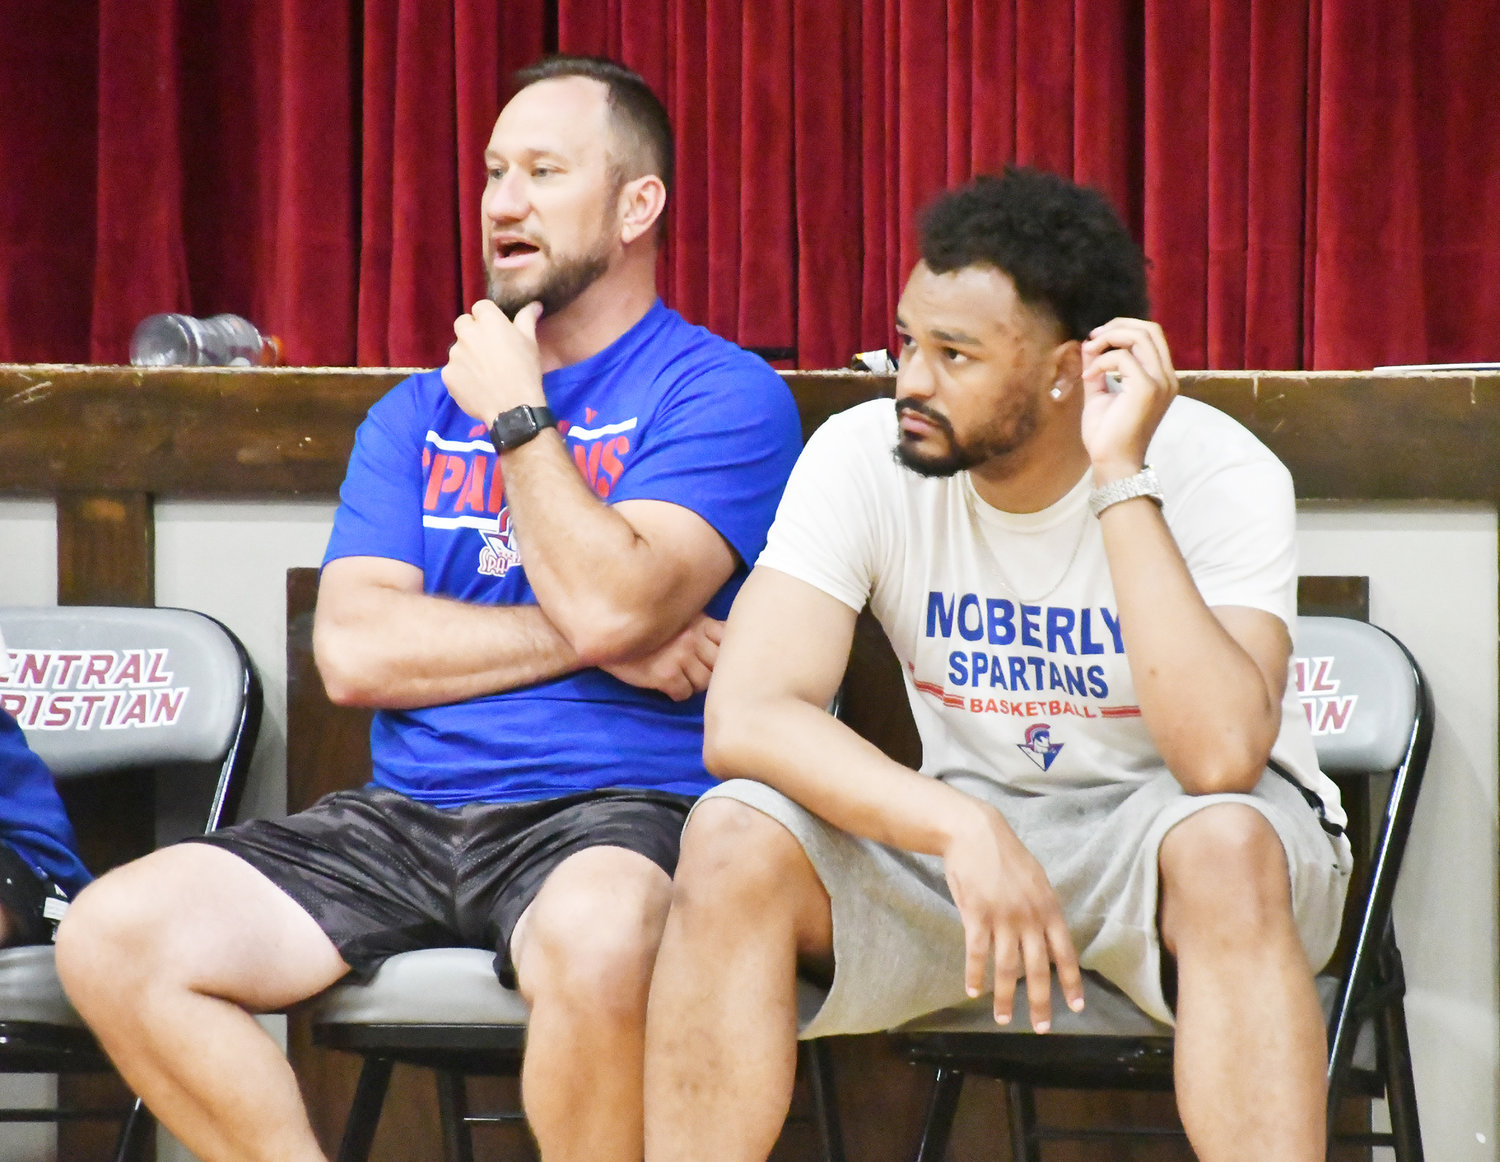 Brad Fuemmeler and Will Rucker look on during Monday's scrimmage. Fuemmeler and Rucker reportedly have been added the Spartan boys' basketball coaching staff as assistants.